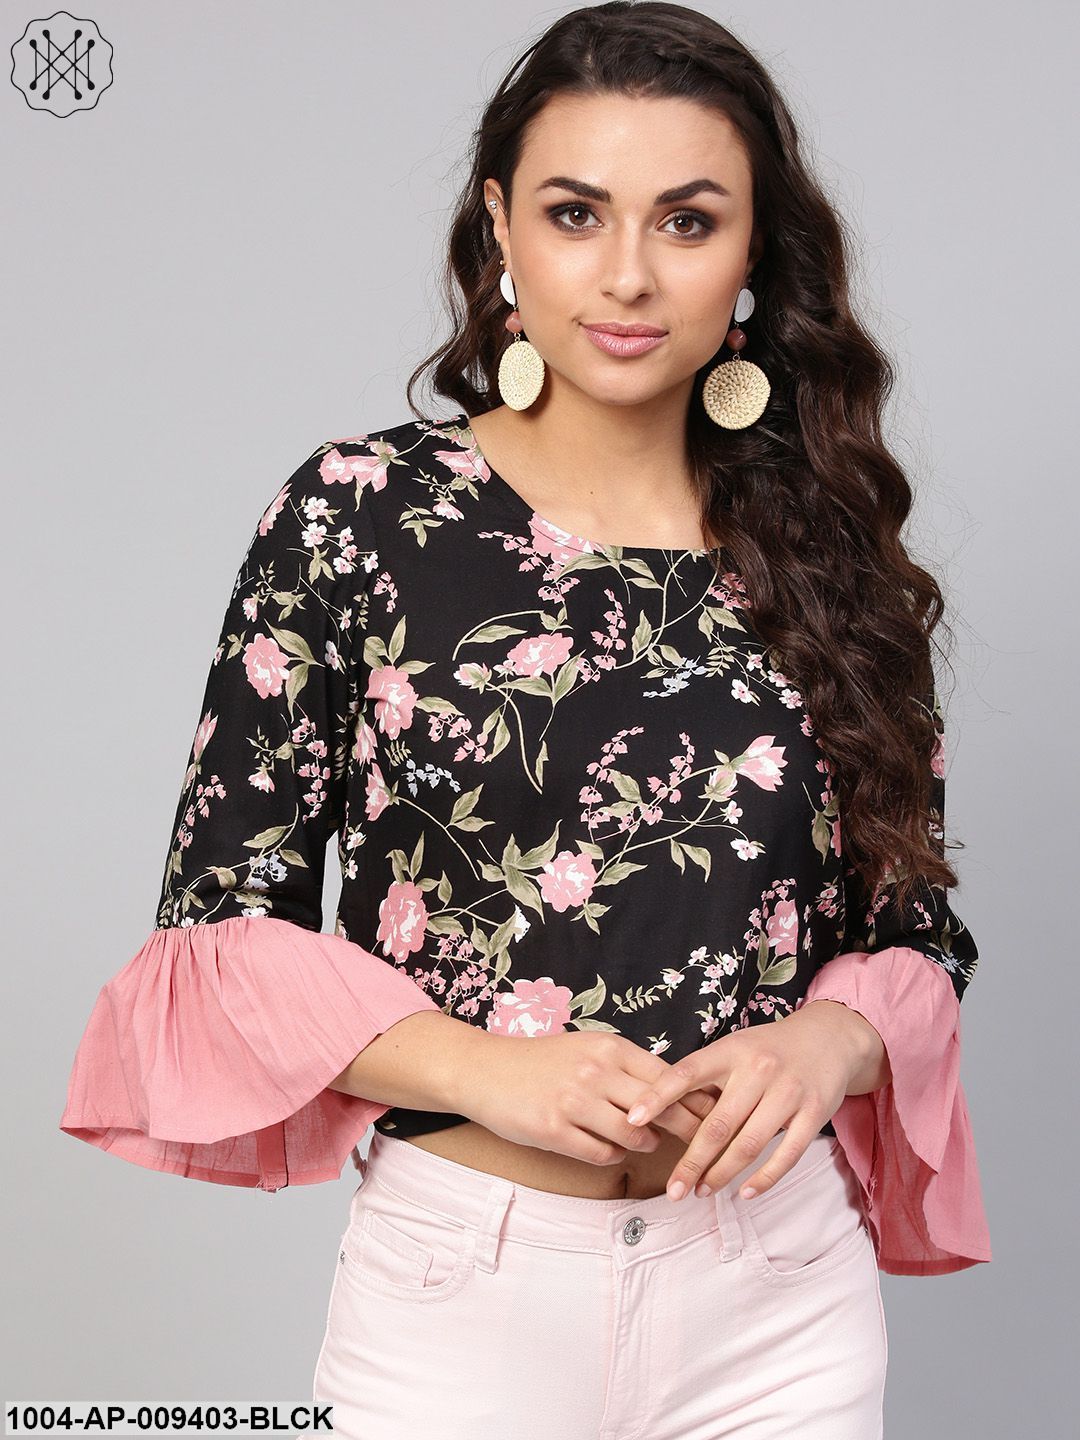 Solid Black Based Multi Floral Prints With A Round Neck And Flared Sleeves